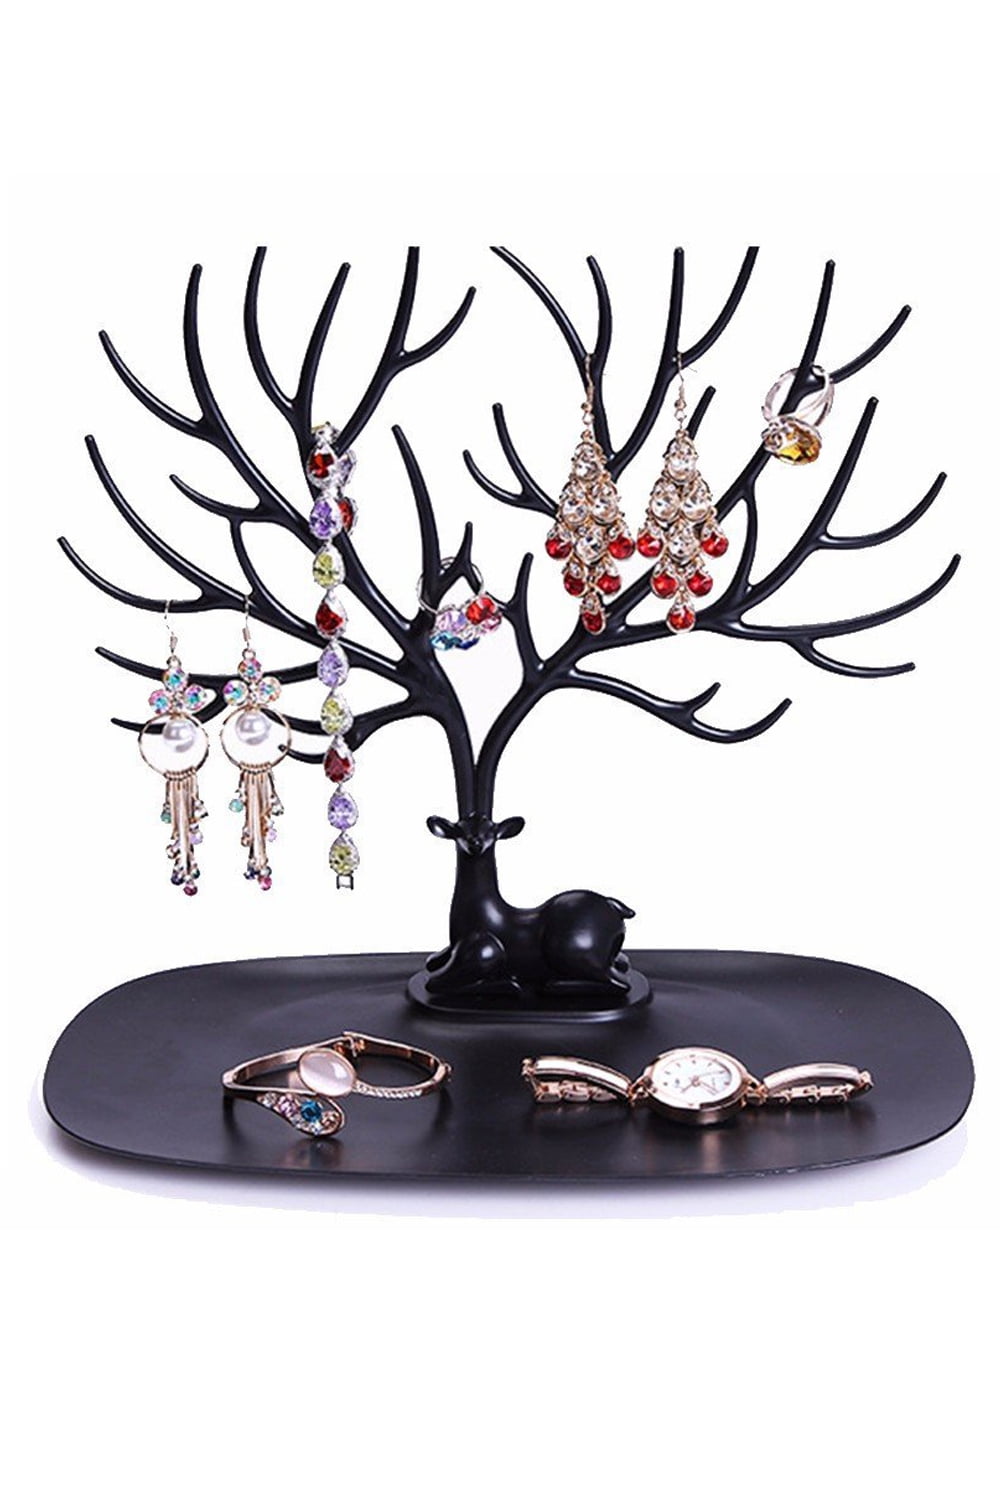 Details about   Deer Tree Jewelry Display Stand Organizer Necklace Earring Holder Rings Rack 